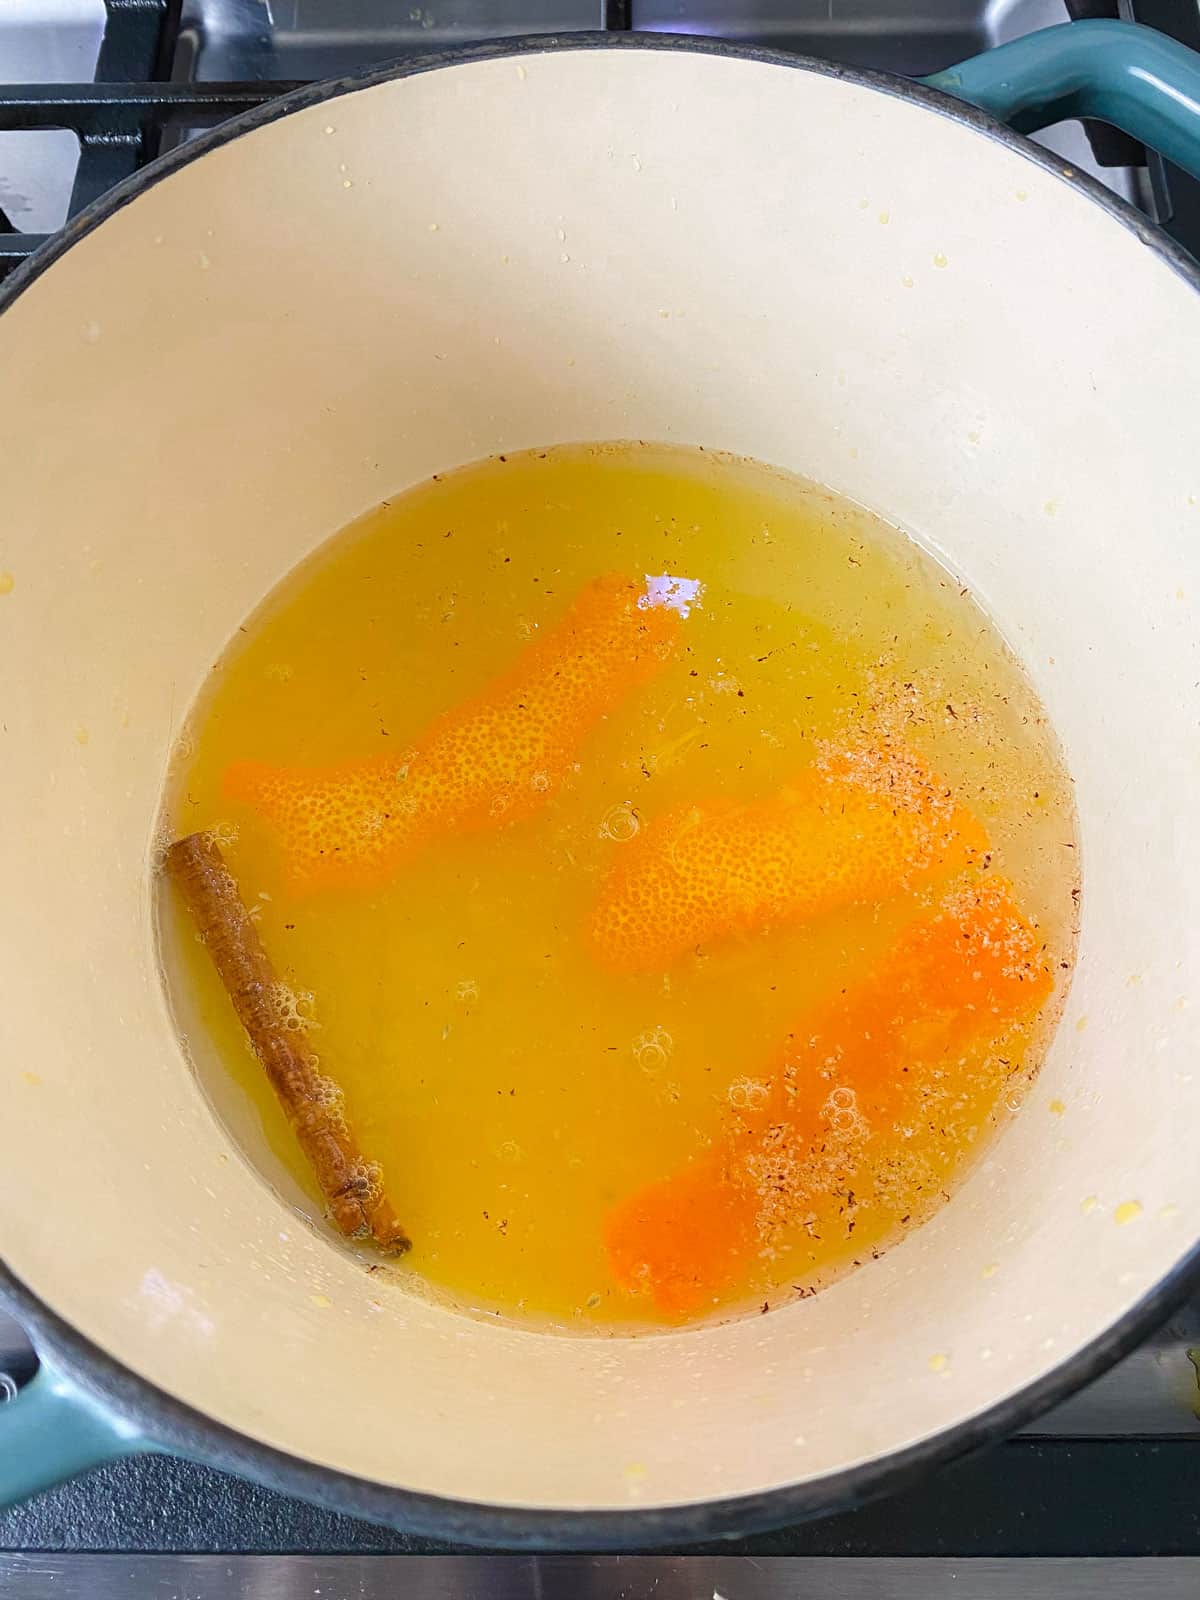 Add all of the pear poaching liquid to a pot, including the cinnamon stick, nutmeg, orange peels, sugar and white wine.